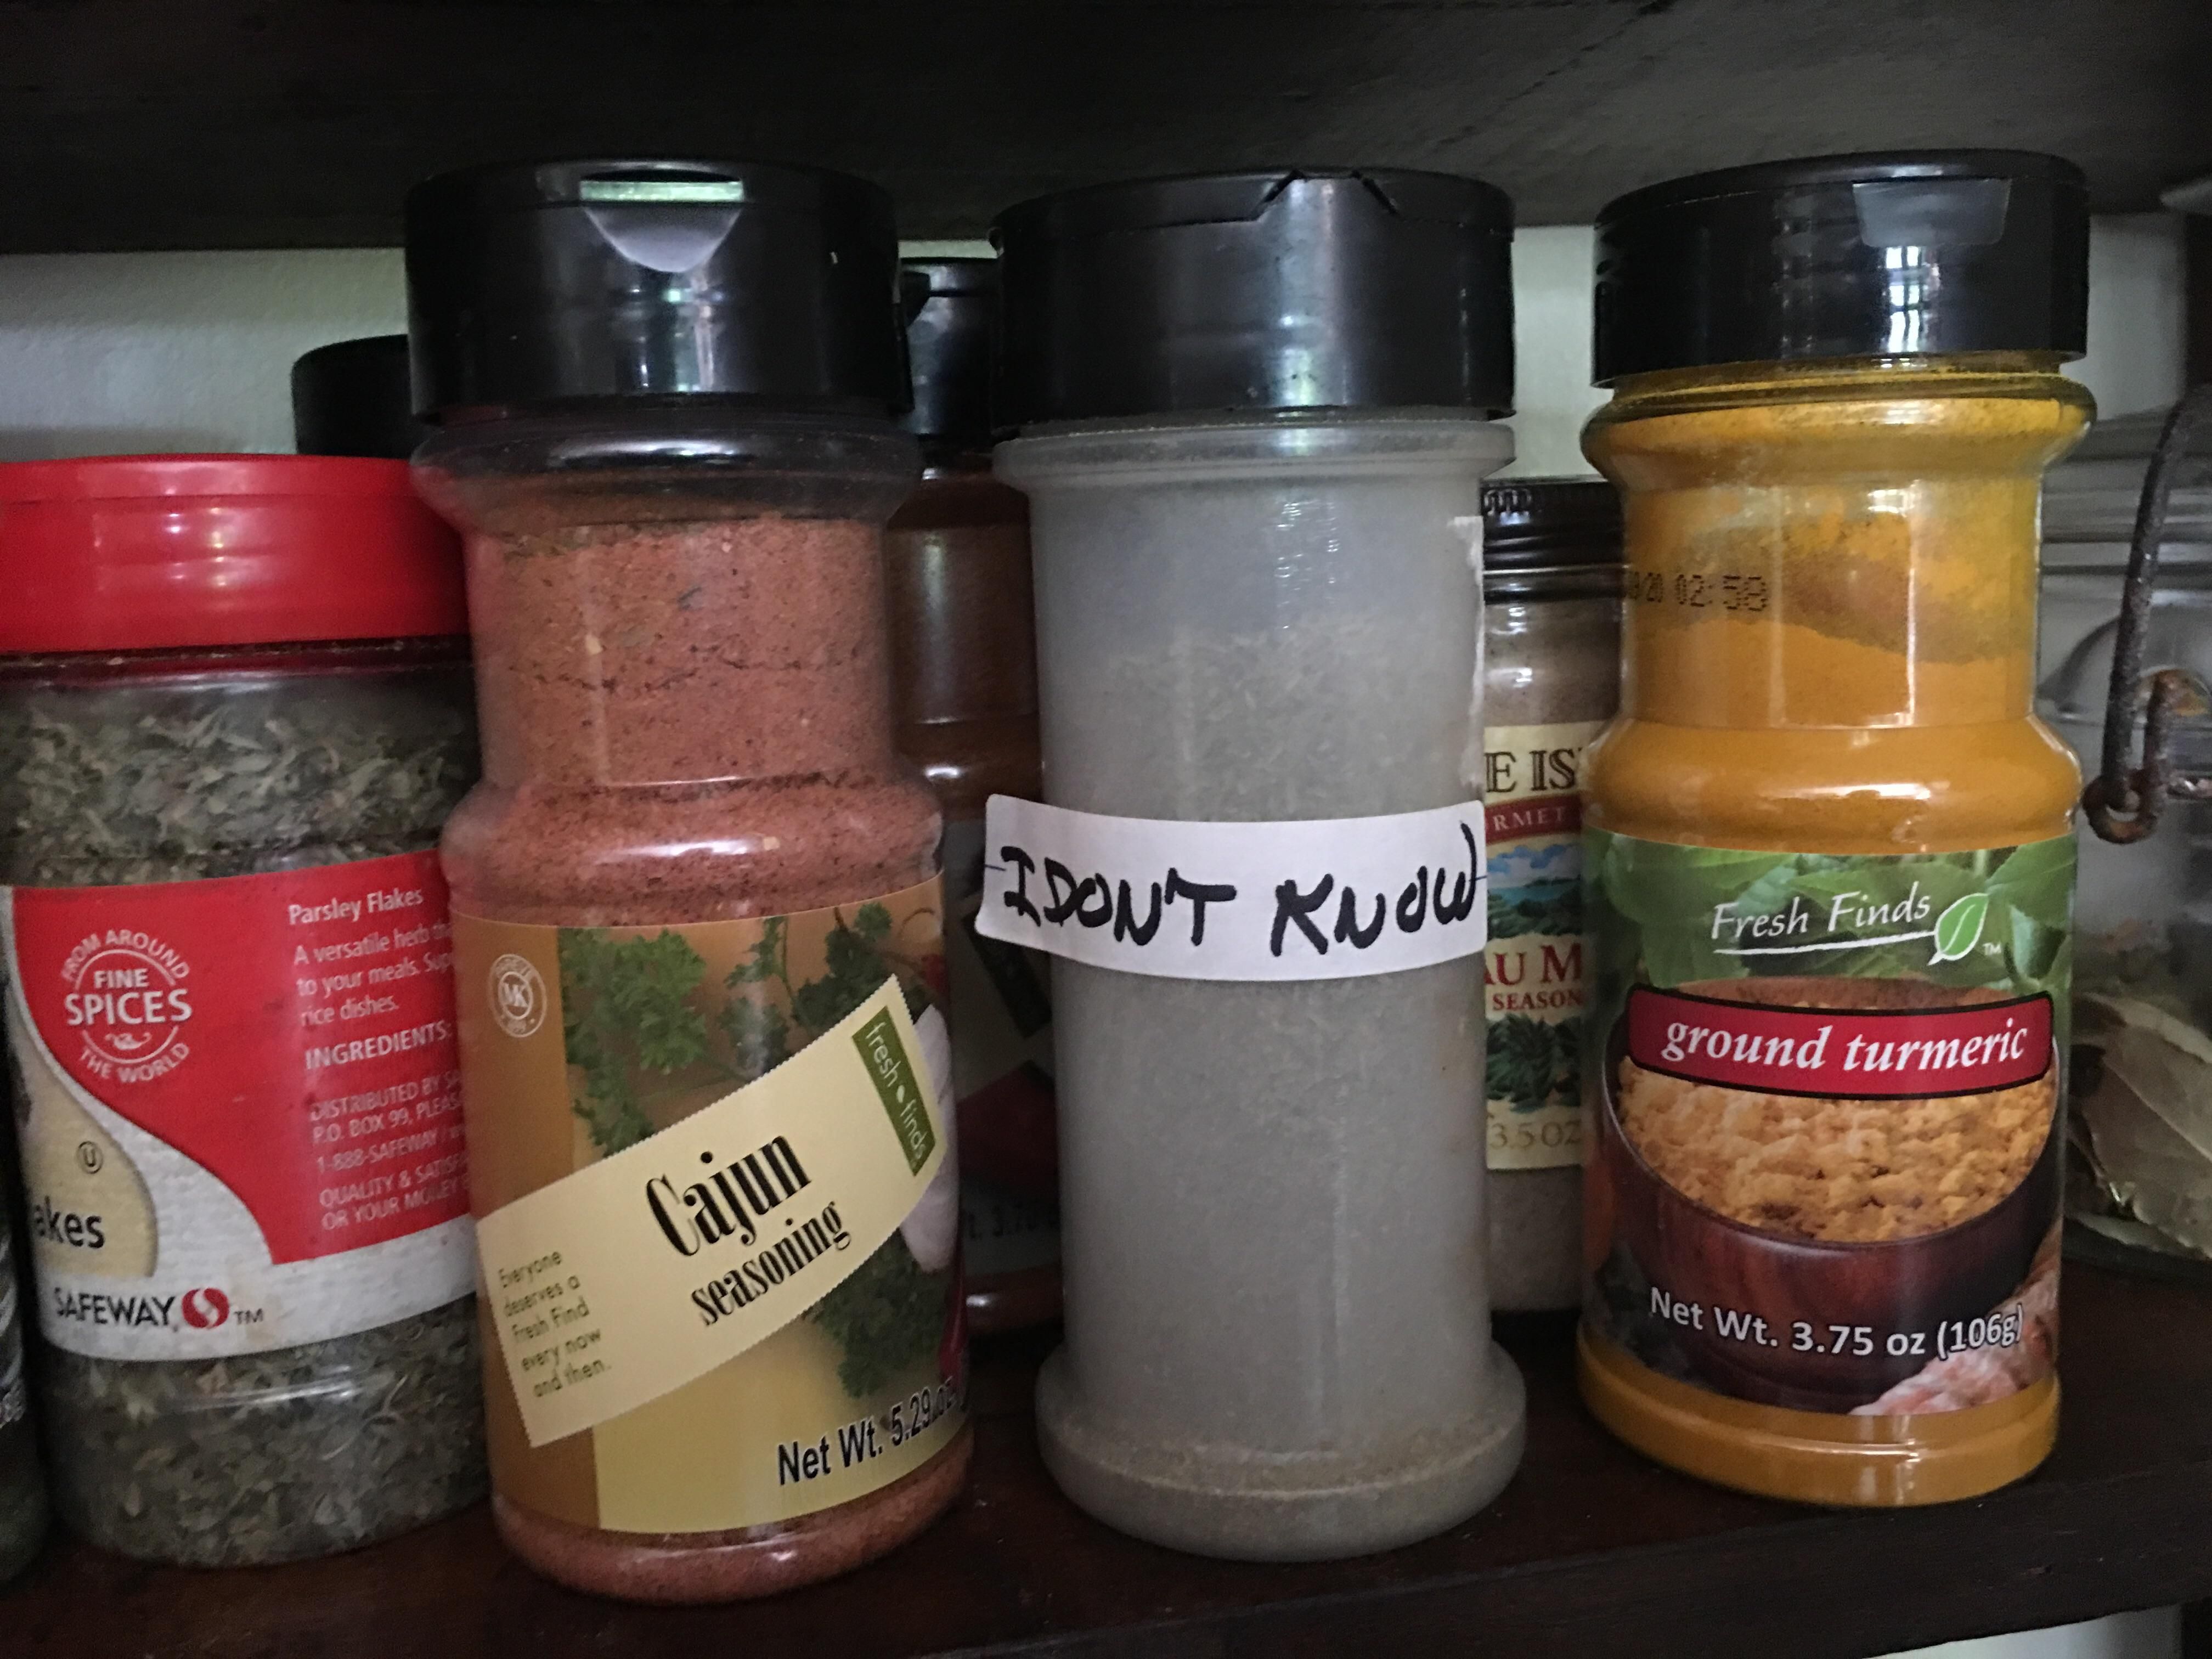 Found this in my dad's spice rack: he's a child of the Depression and can't waste anything, even if he doesn't know what it is.